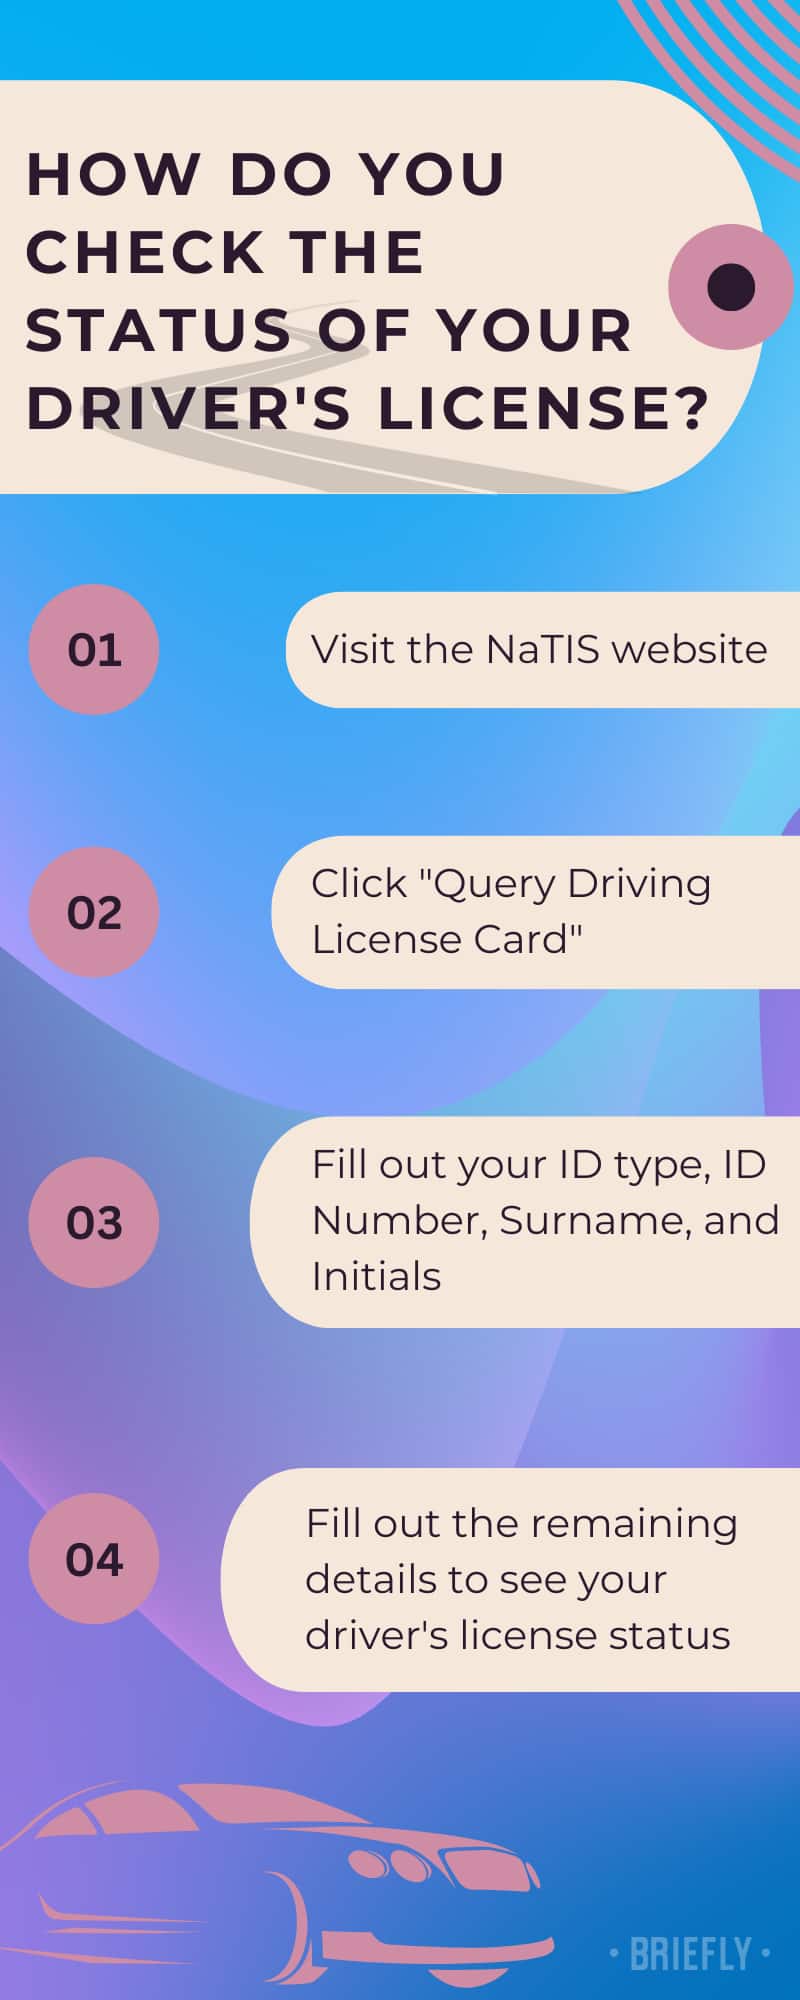 Driver's license status online in South Africa